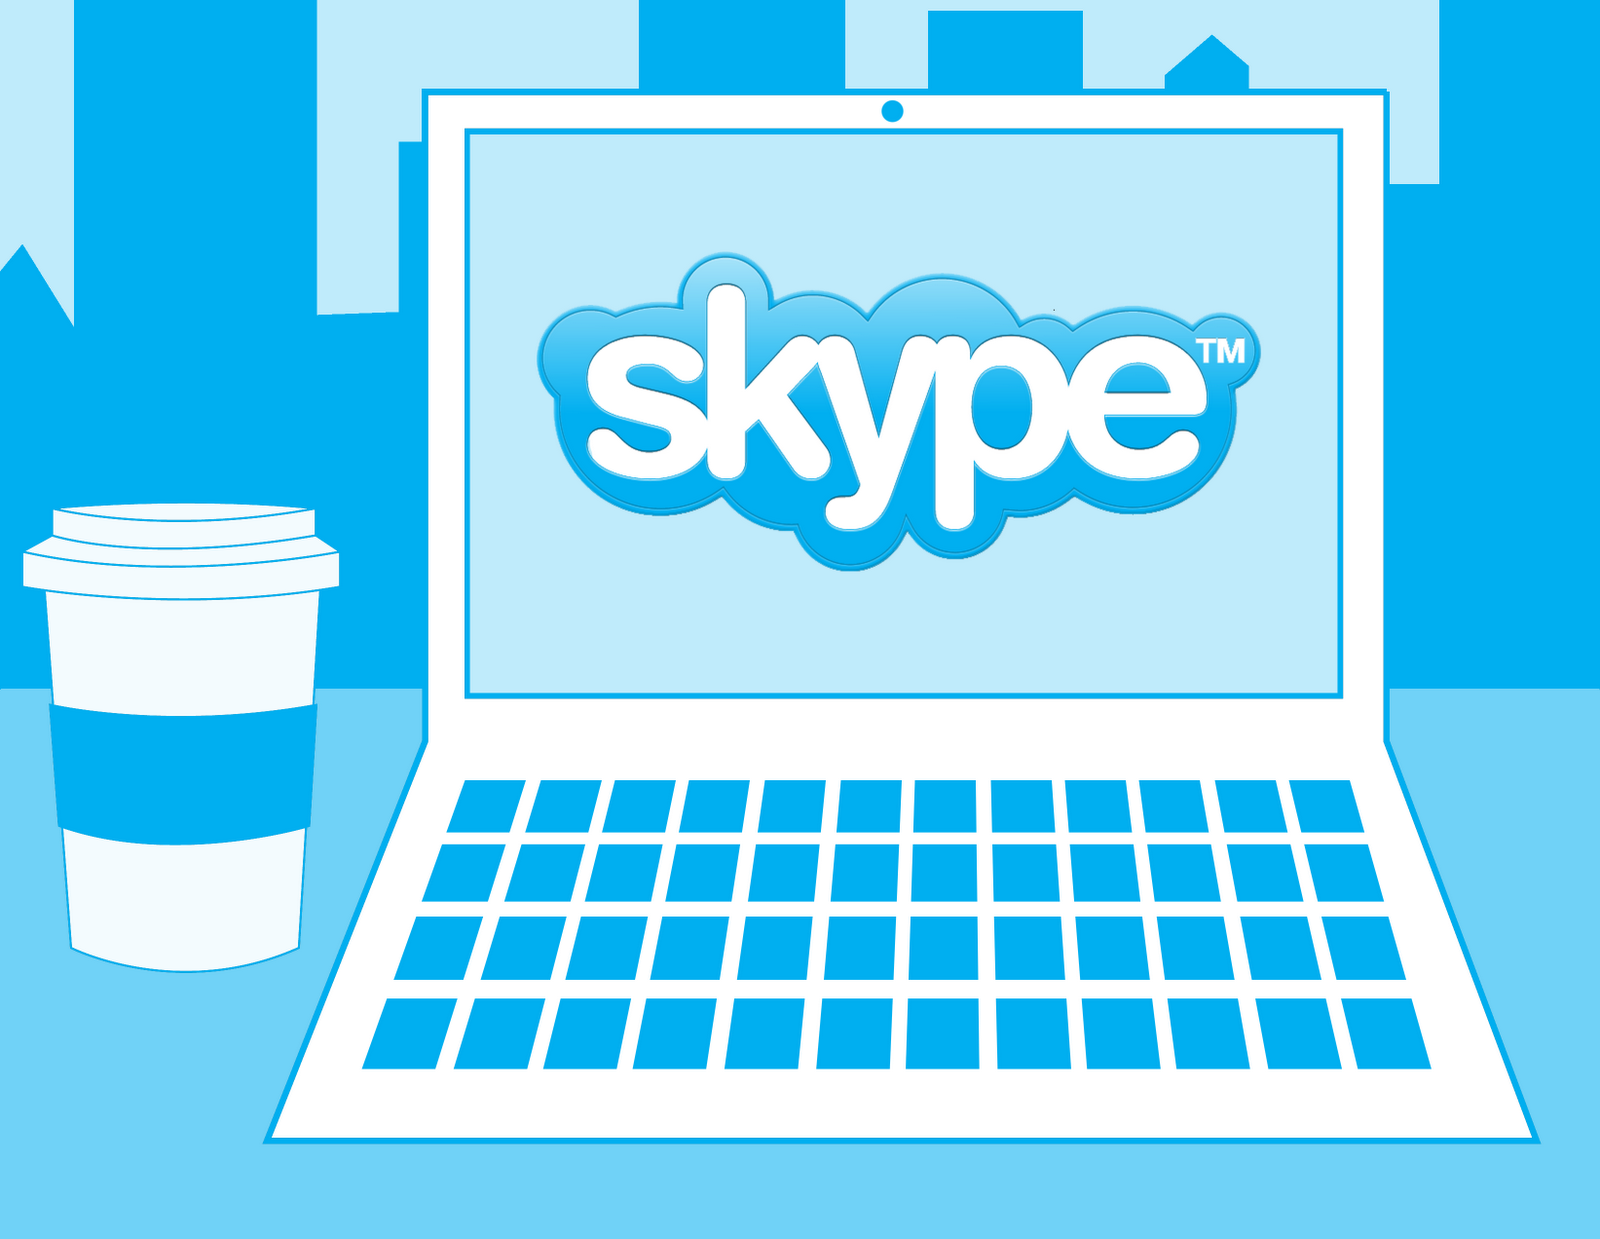 how to skype on a mobile phone